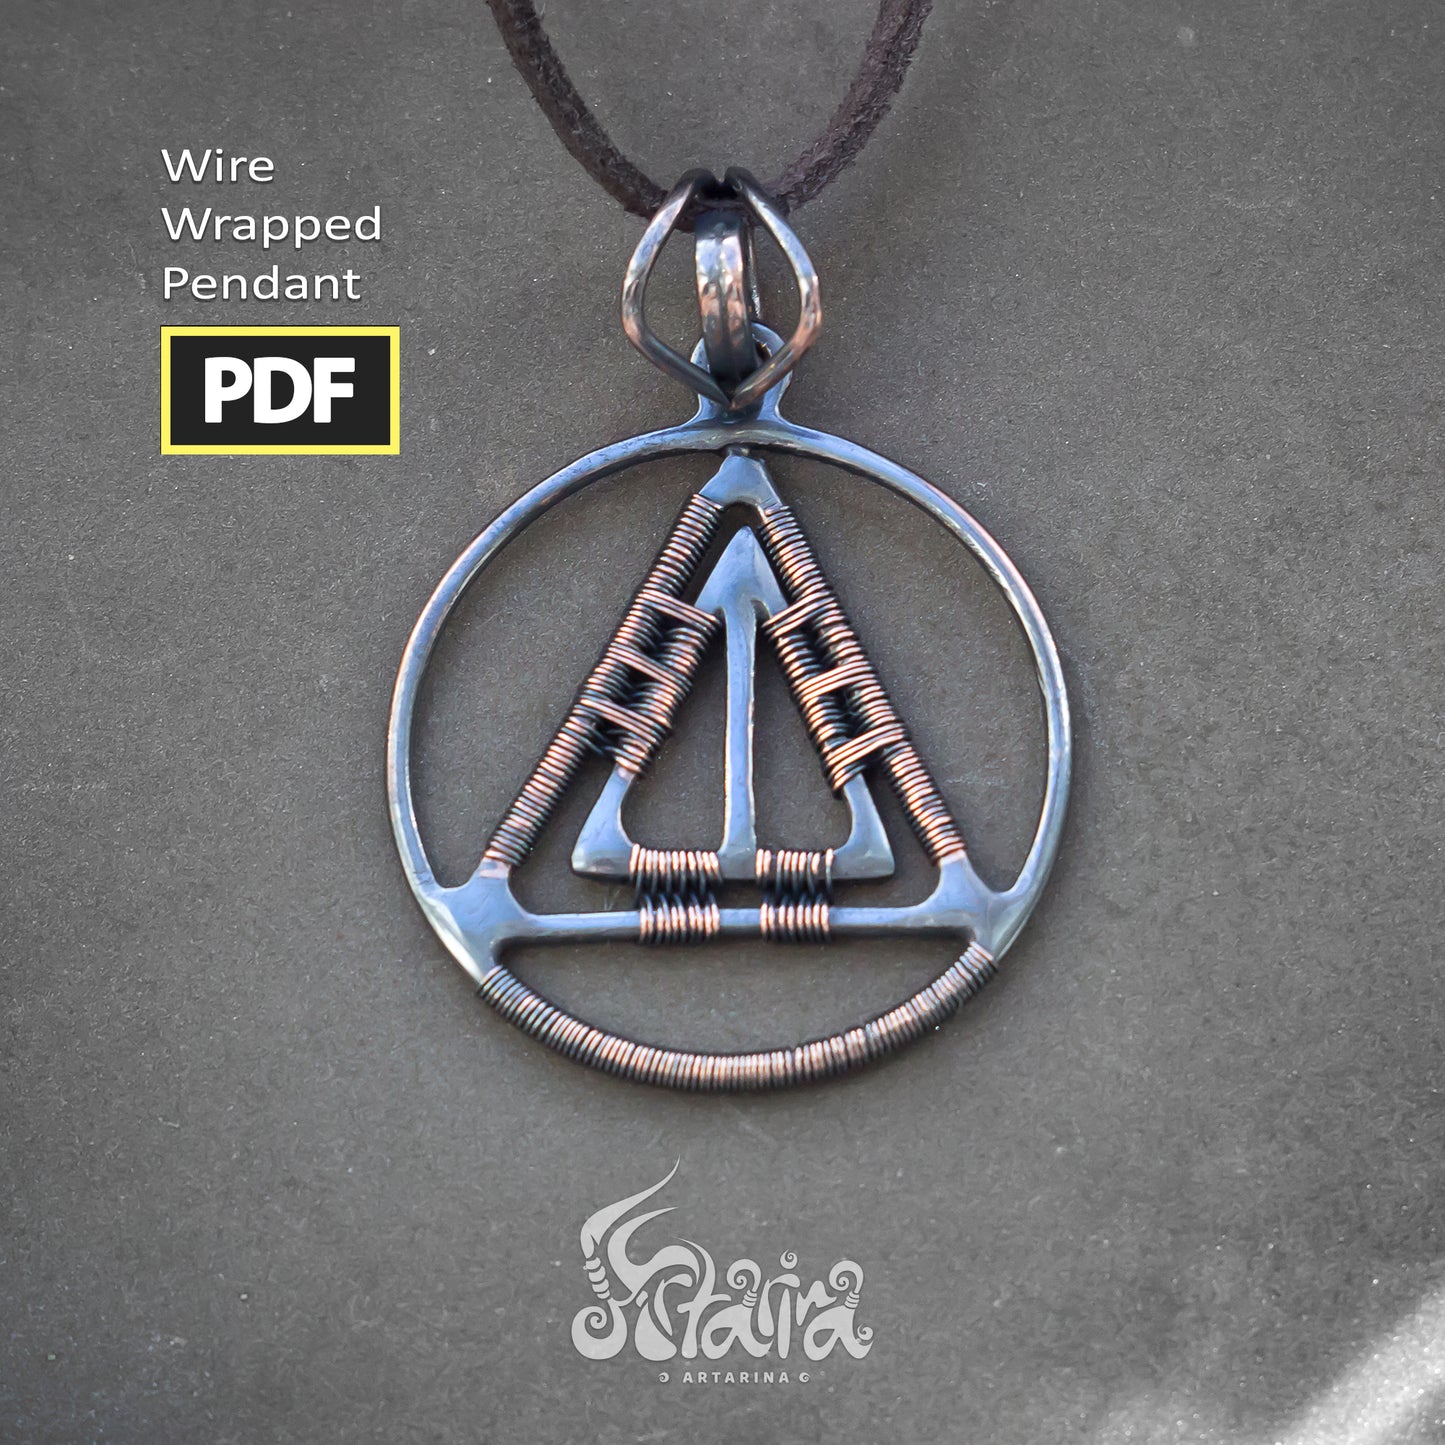 Wire wrapped geometrical PDF pendant tutorial | Wire wrapping step by step DIY lesson